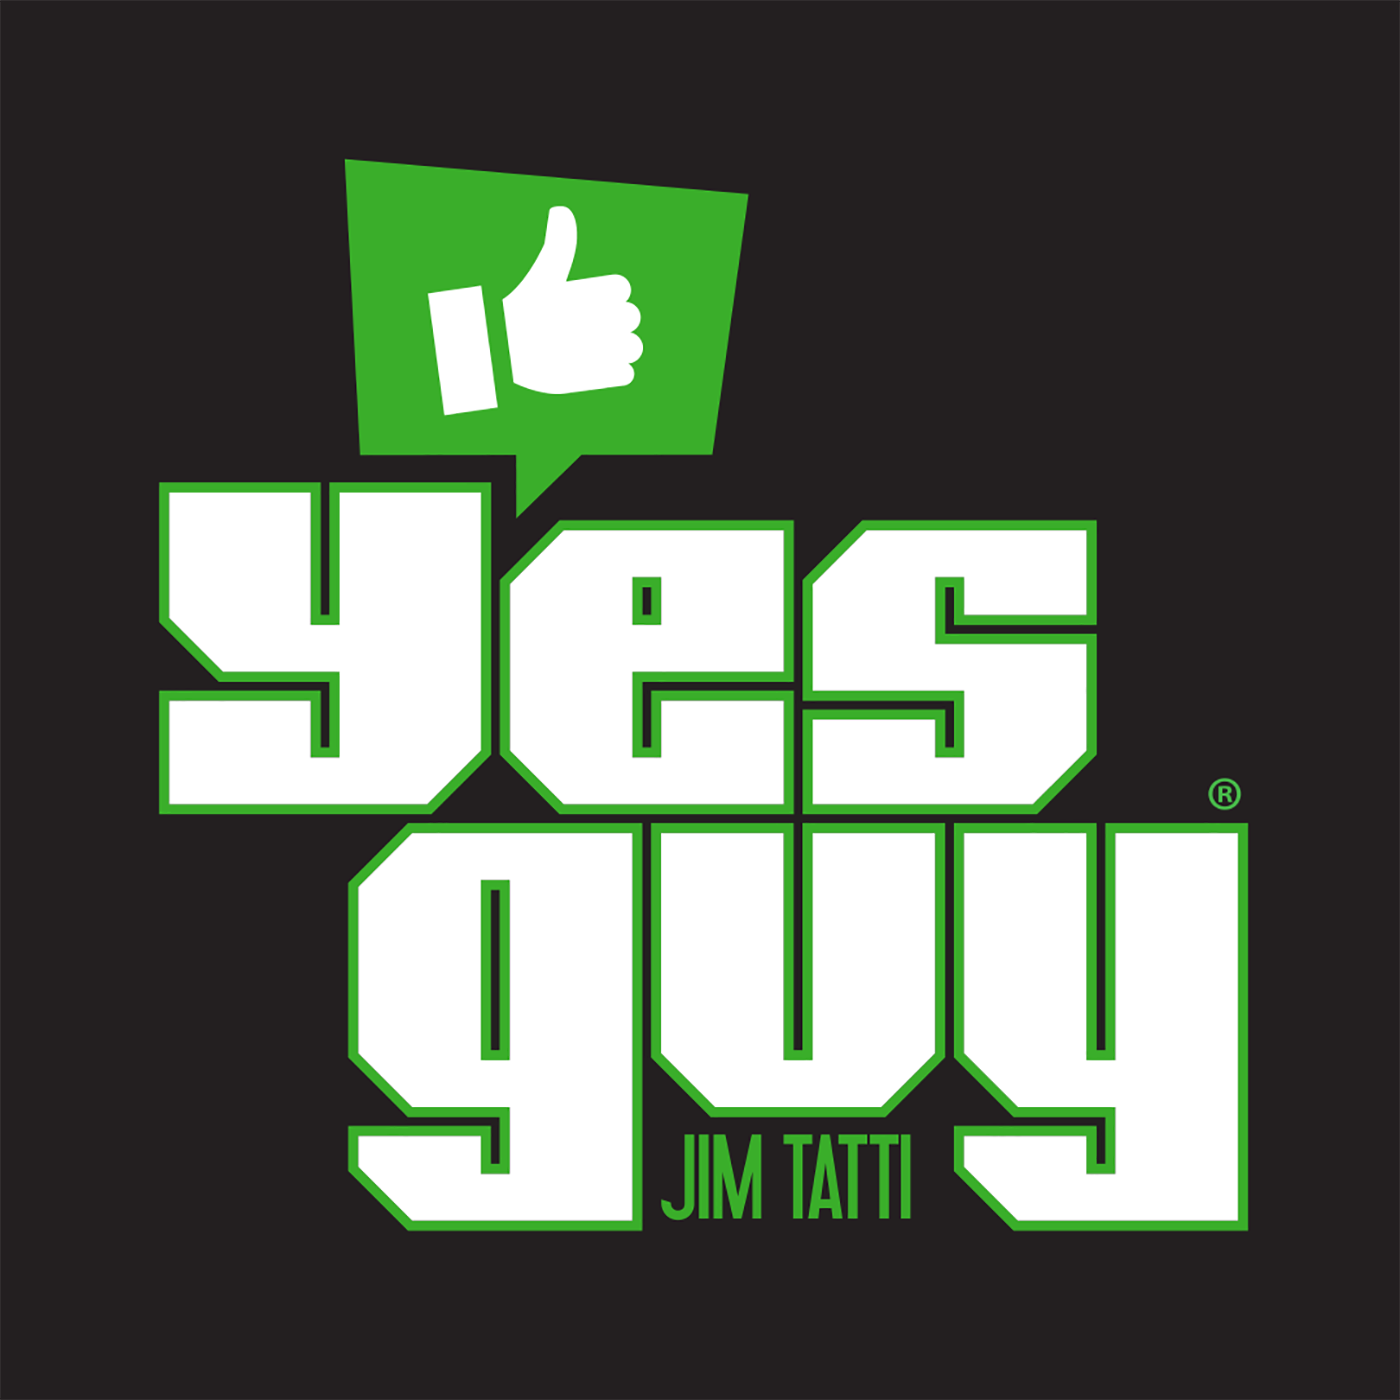 Yes Guy - May 3 - Episode 201